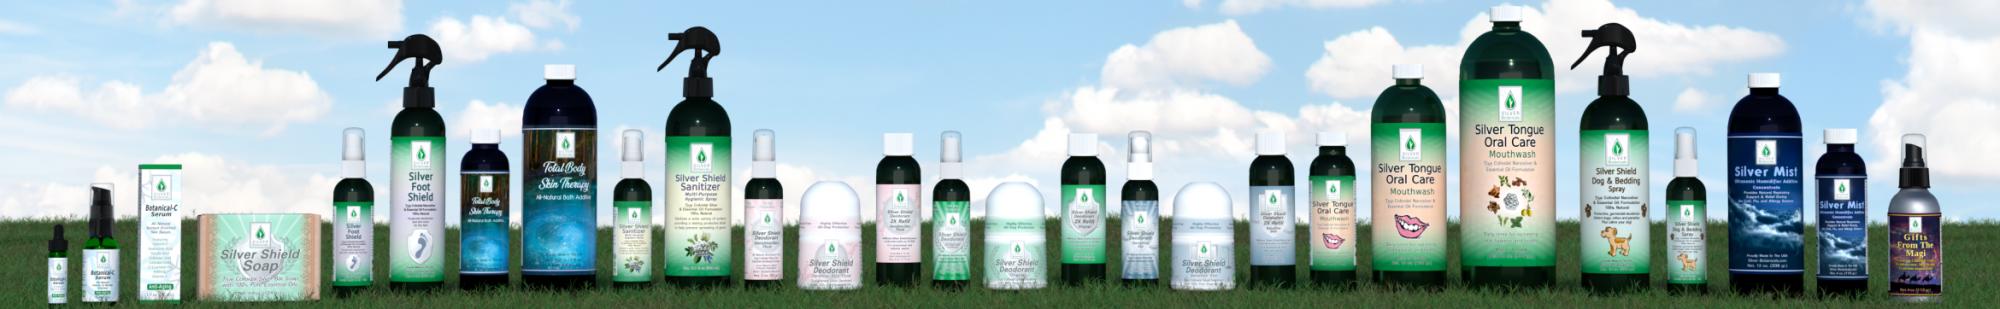 Silver Botanicals Family of Products